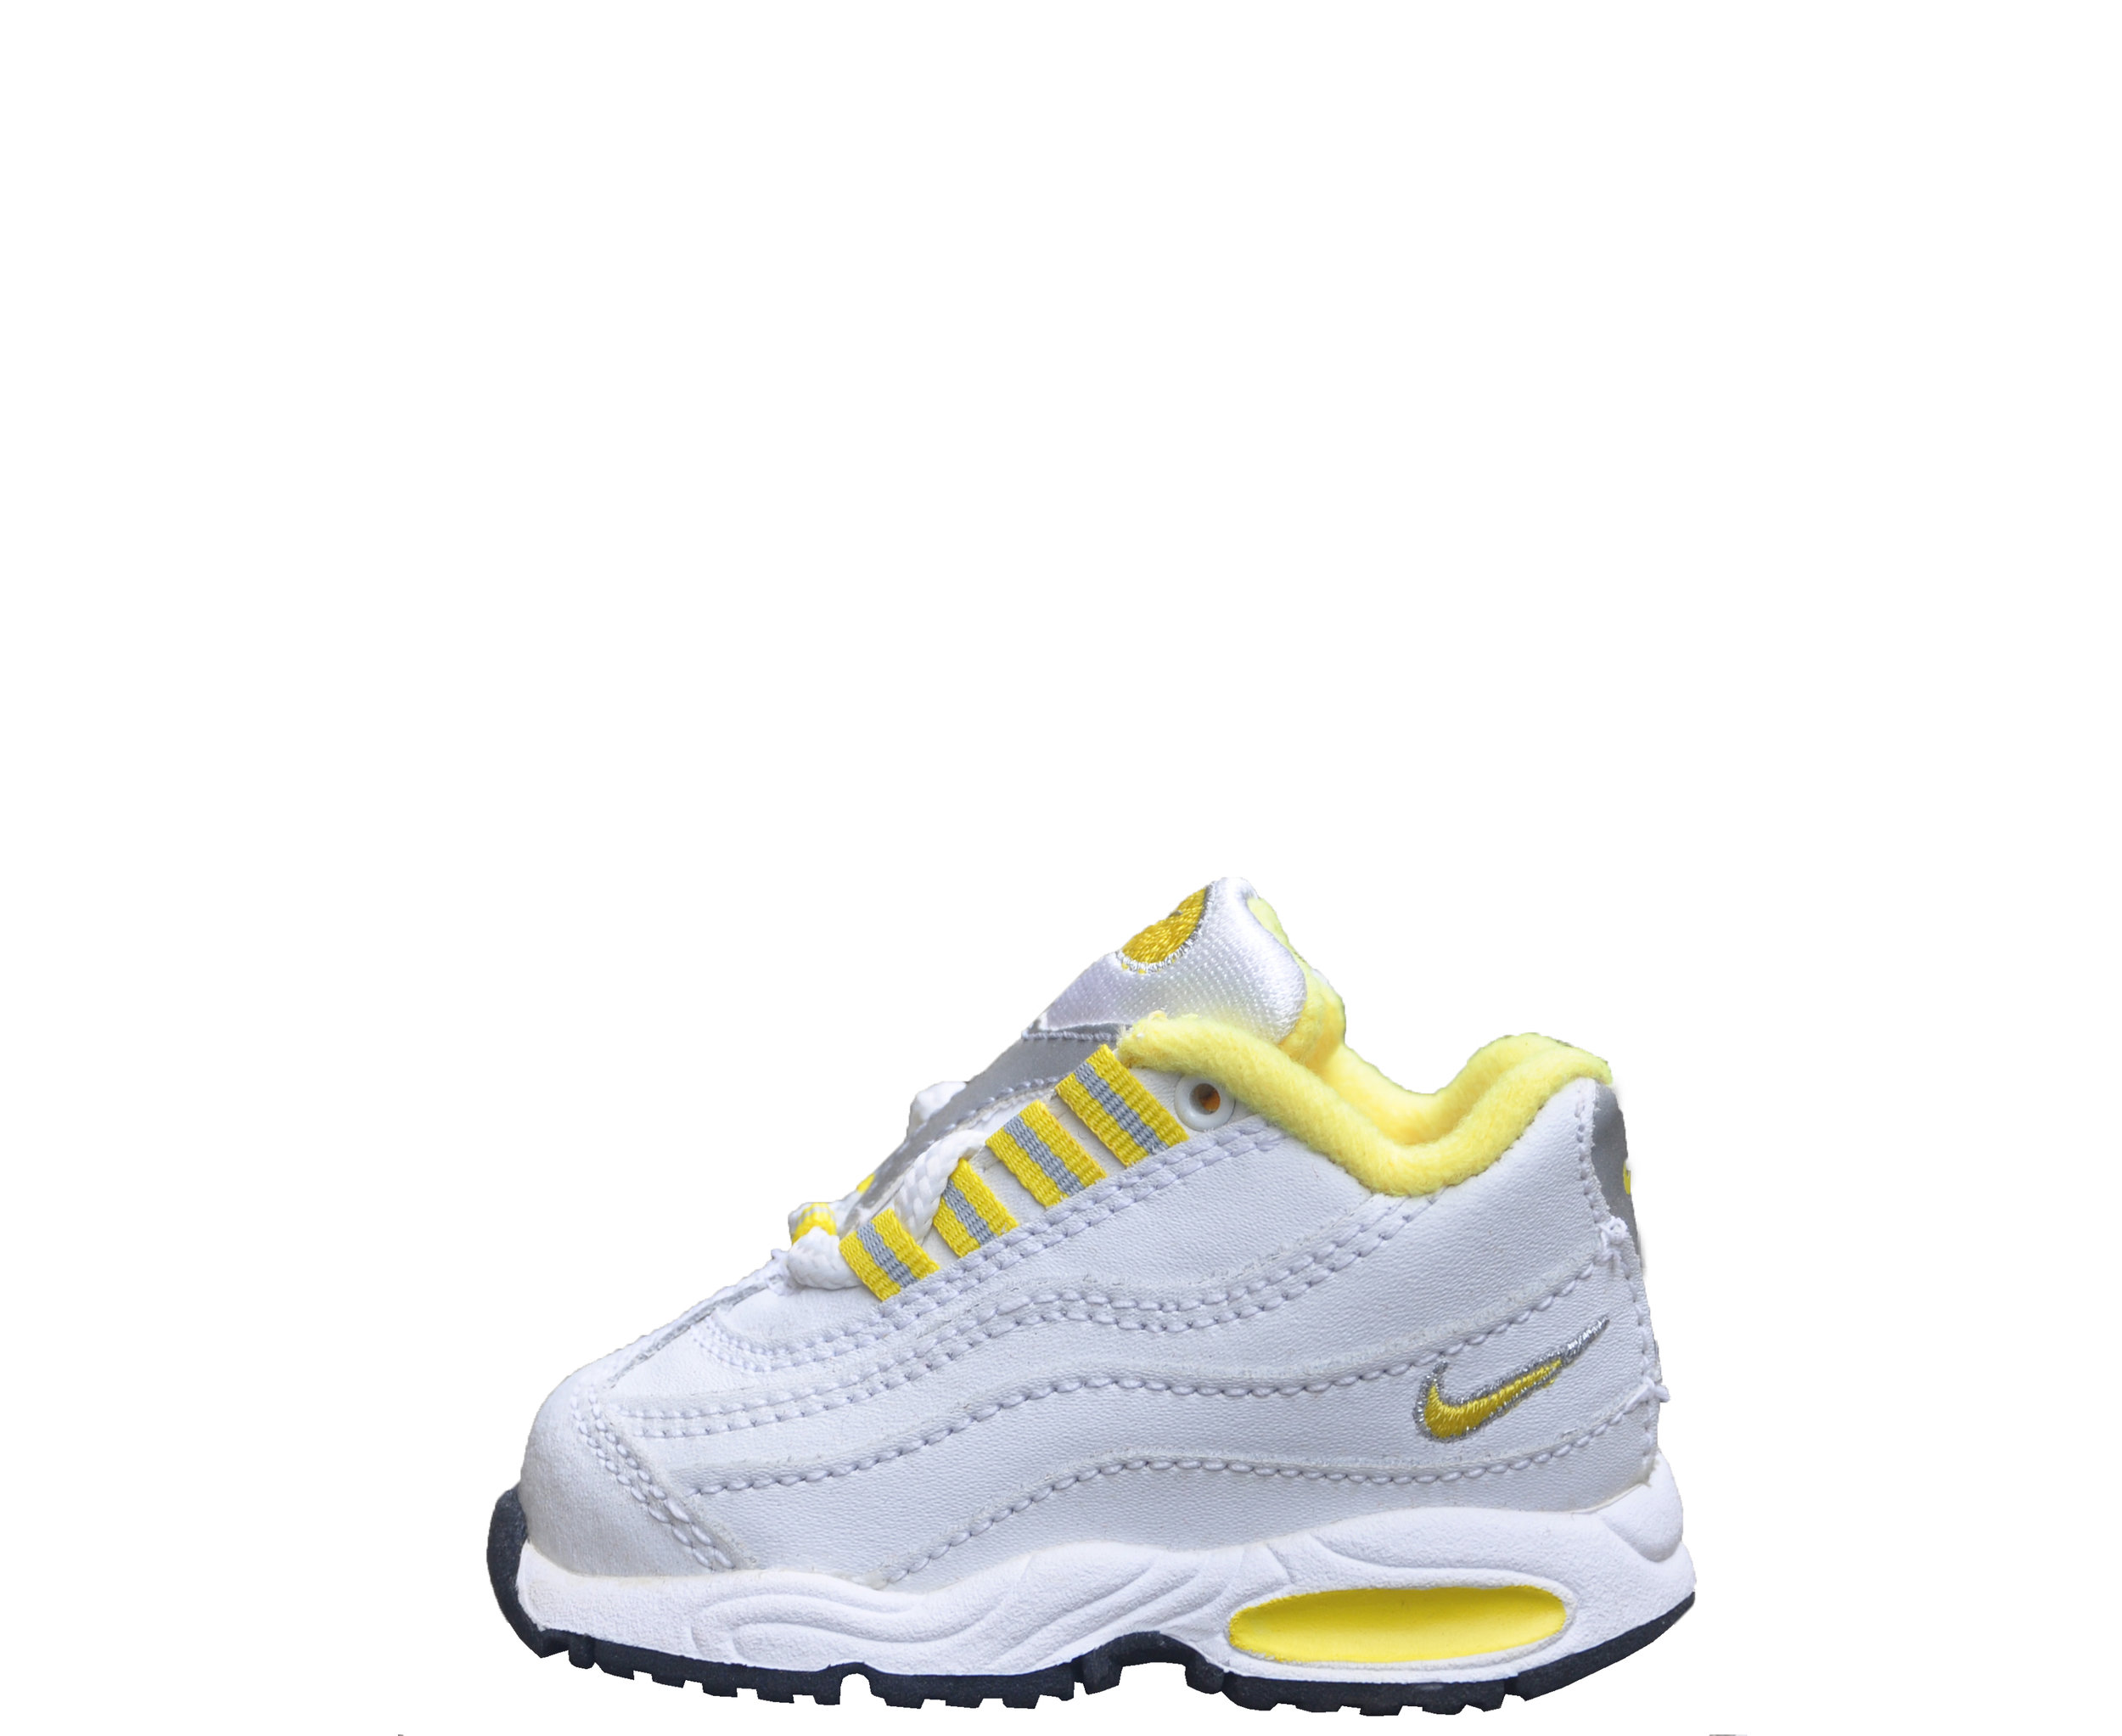 air max 95 white and yellow